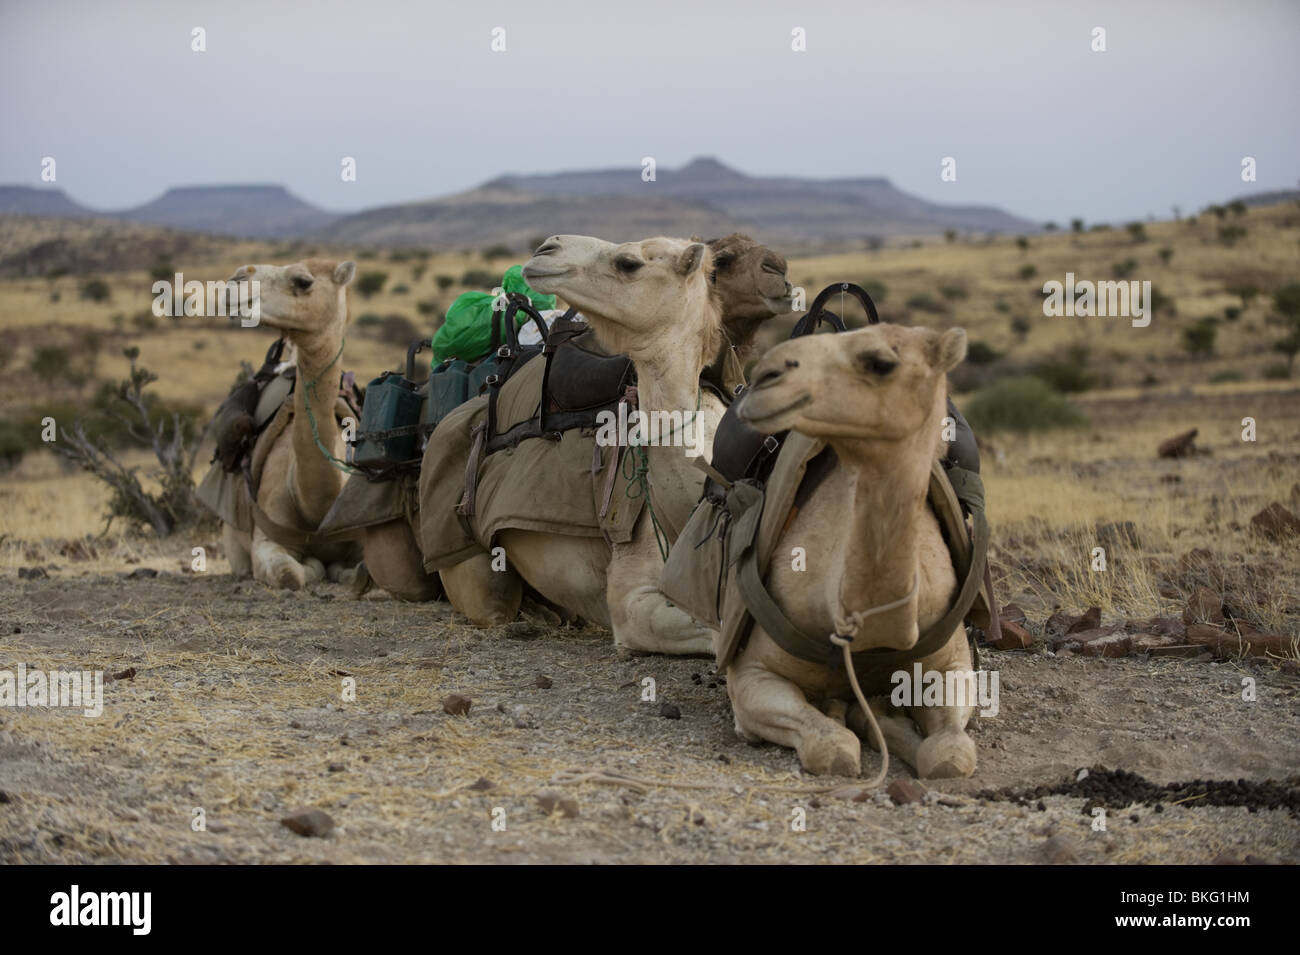 Camel train/caravan waiting to start the day's march, Palmwag, Namibia. Stock Photo